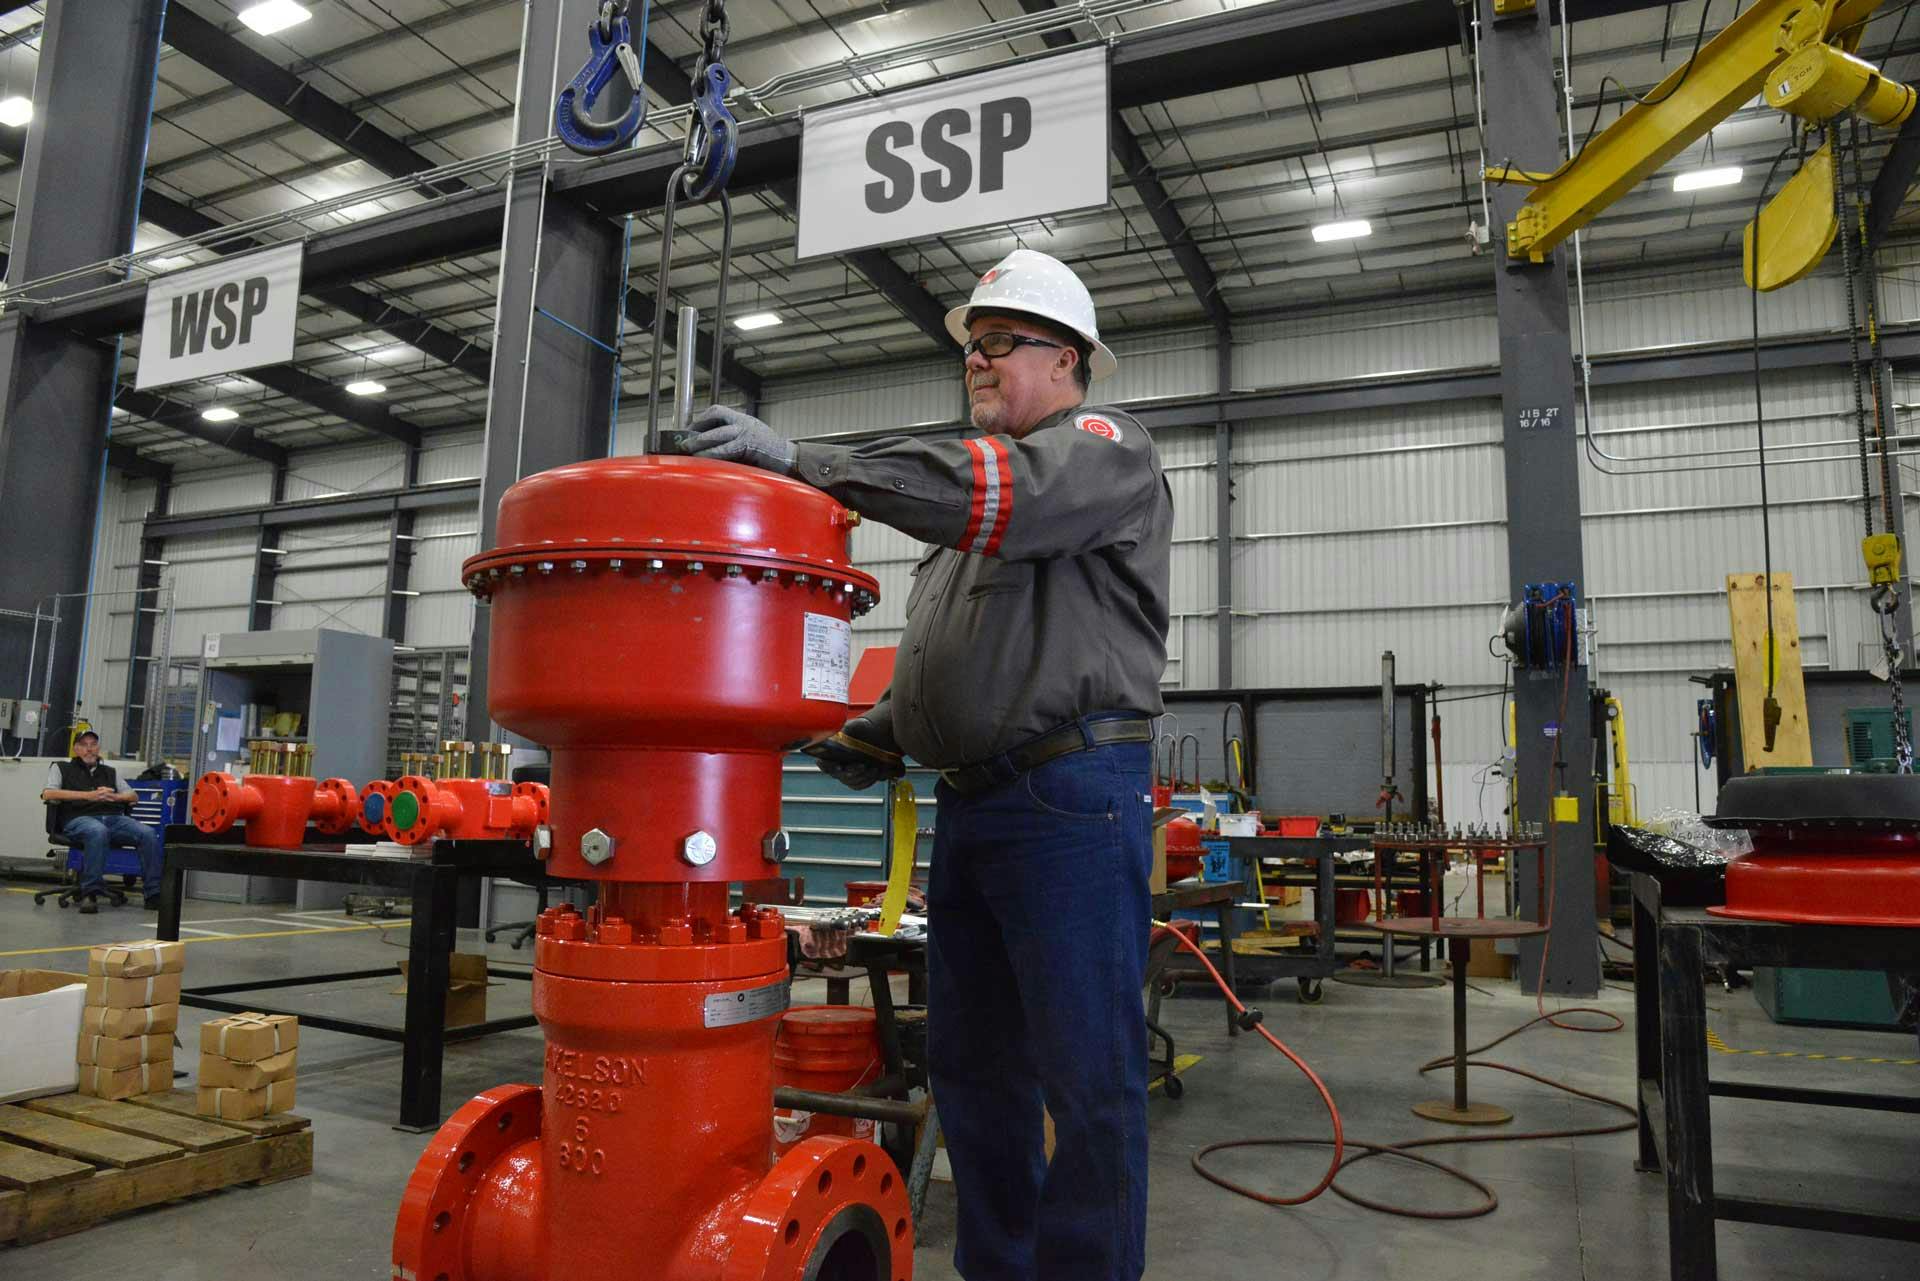 A technician works on a Pneumatic Shutdown Valve in a manufacturing facility